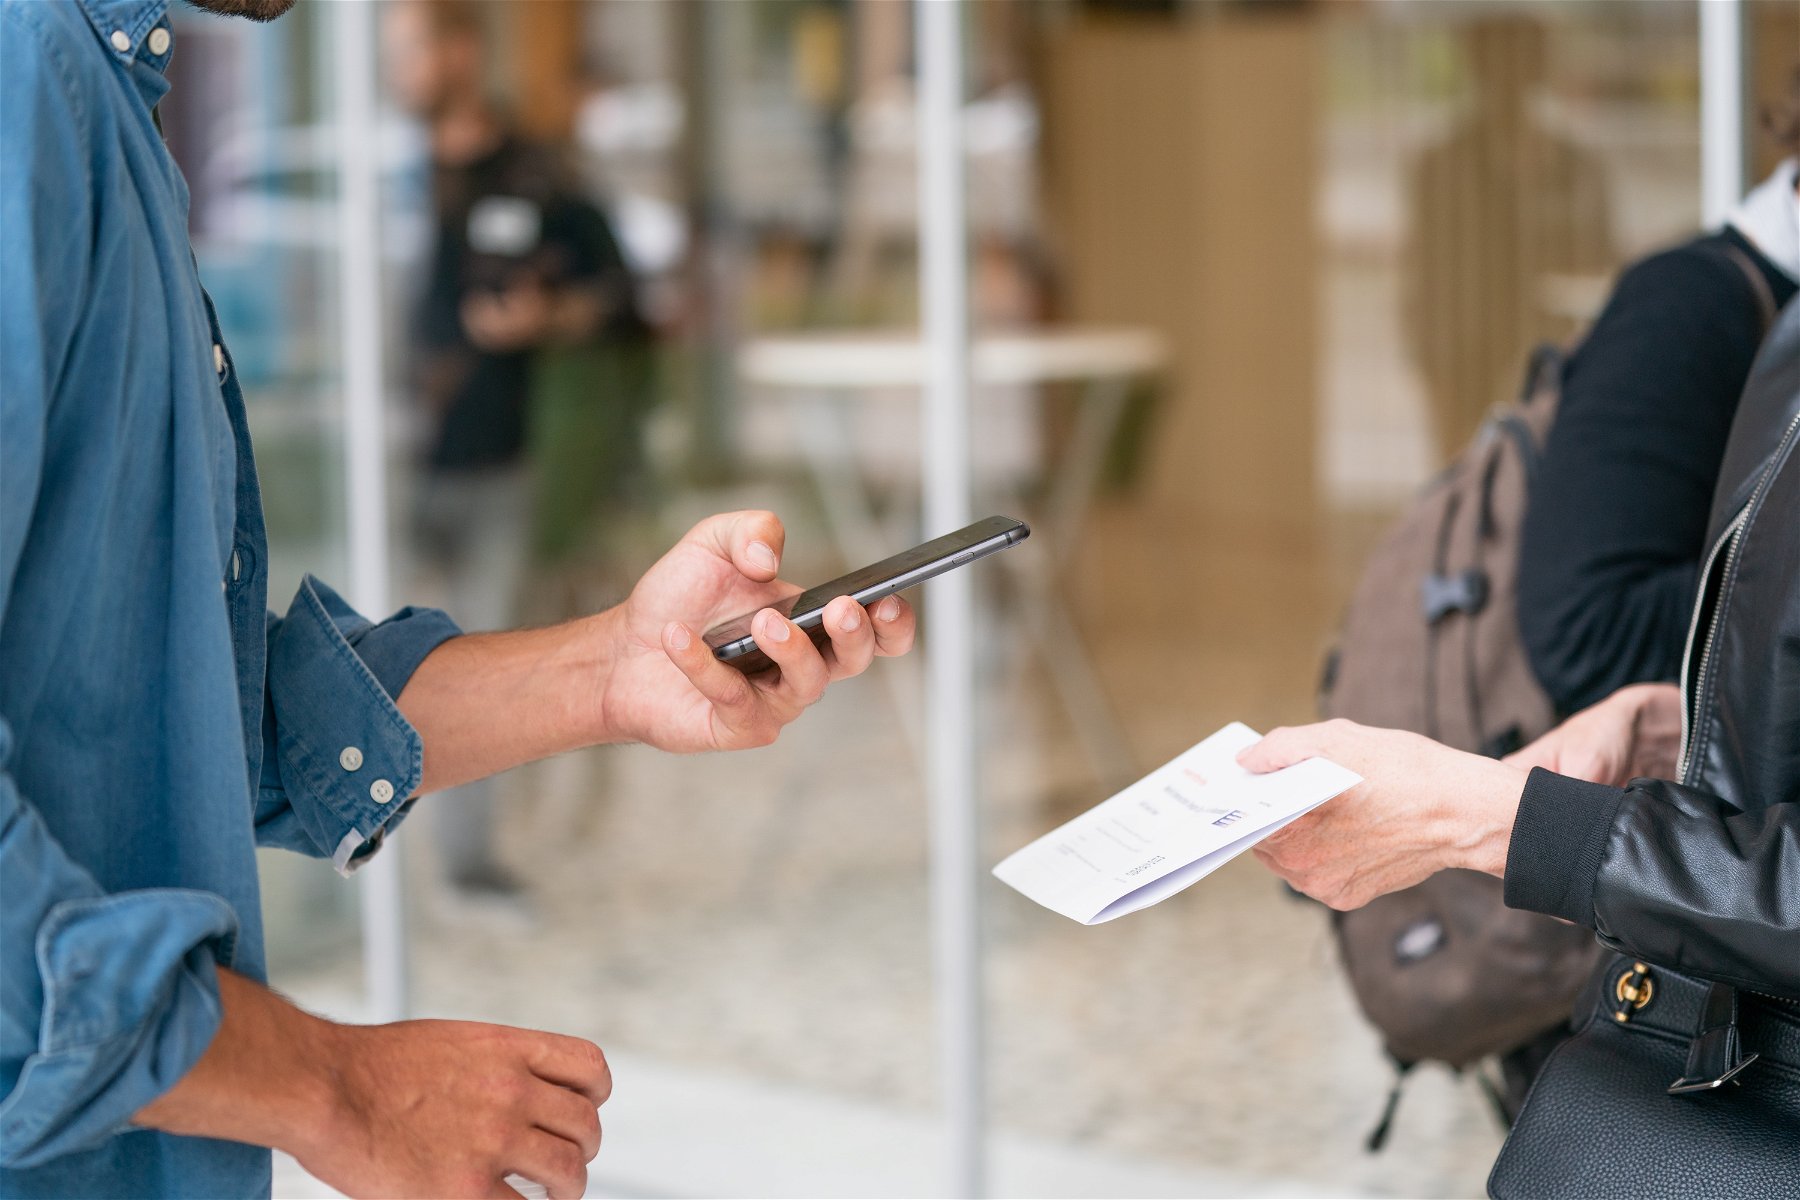 How a smooth check-in improves your guest experience